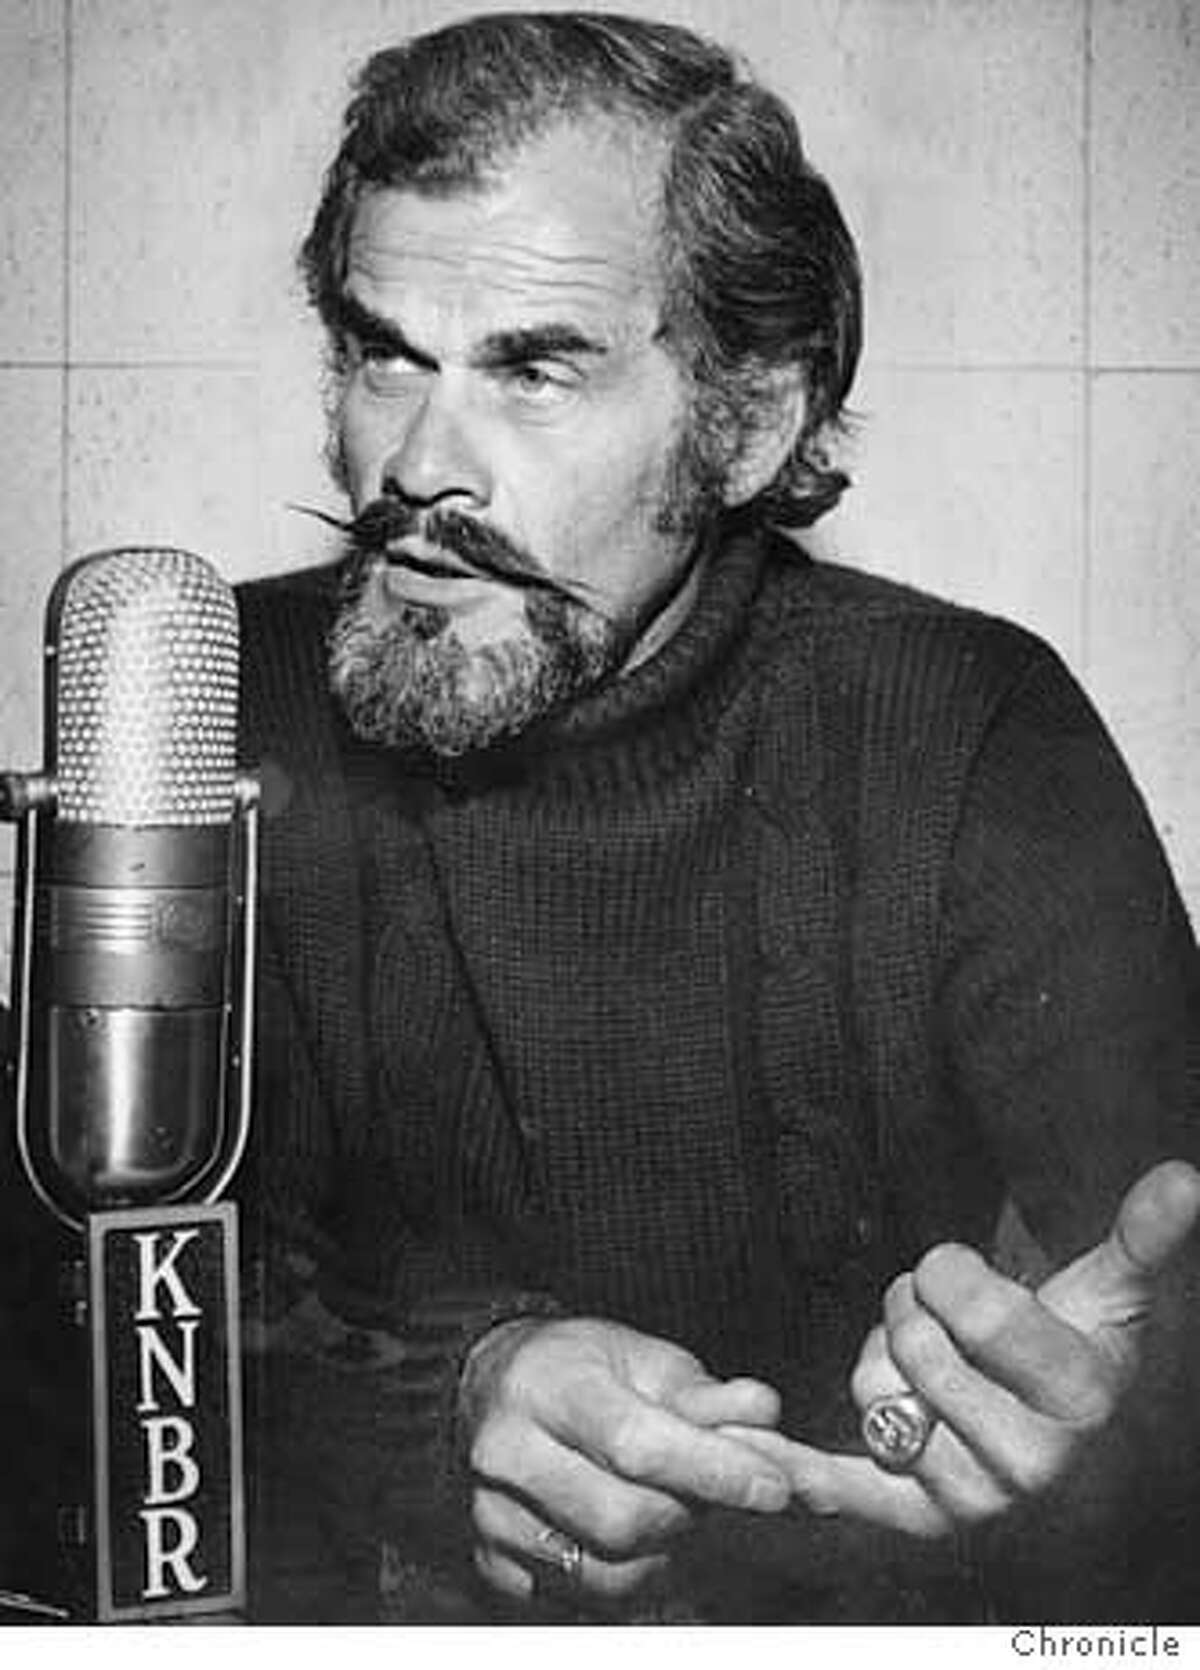 Bay Area Sportscaster Bill King died early Tuesday, Oct. 18, 2005, from complications following hip surgery. He was 78.